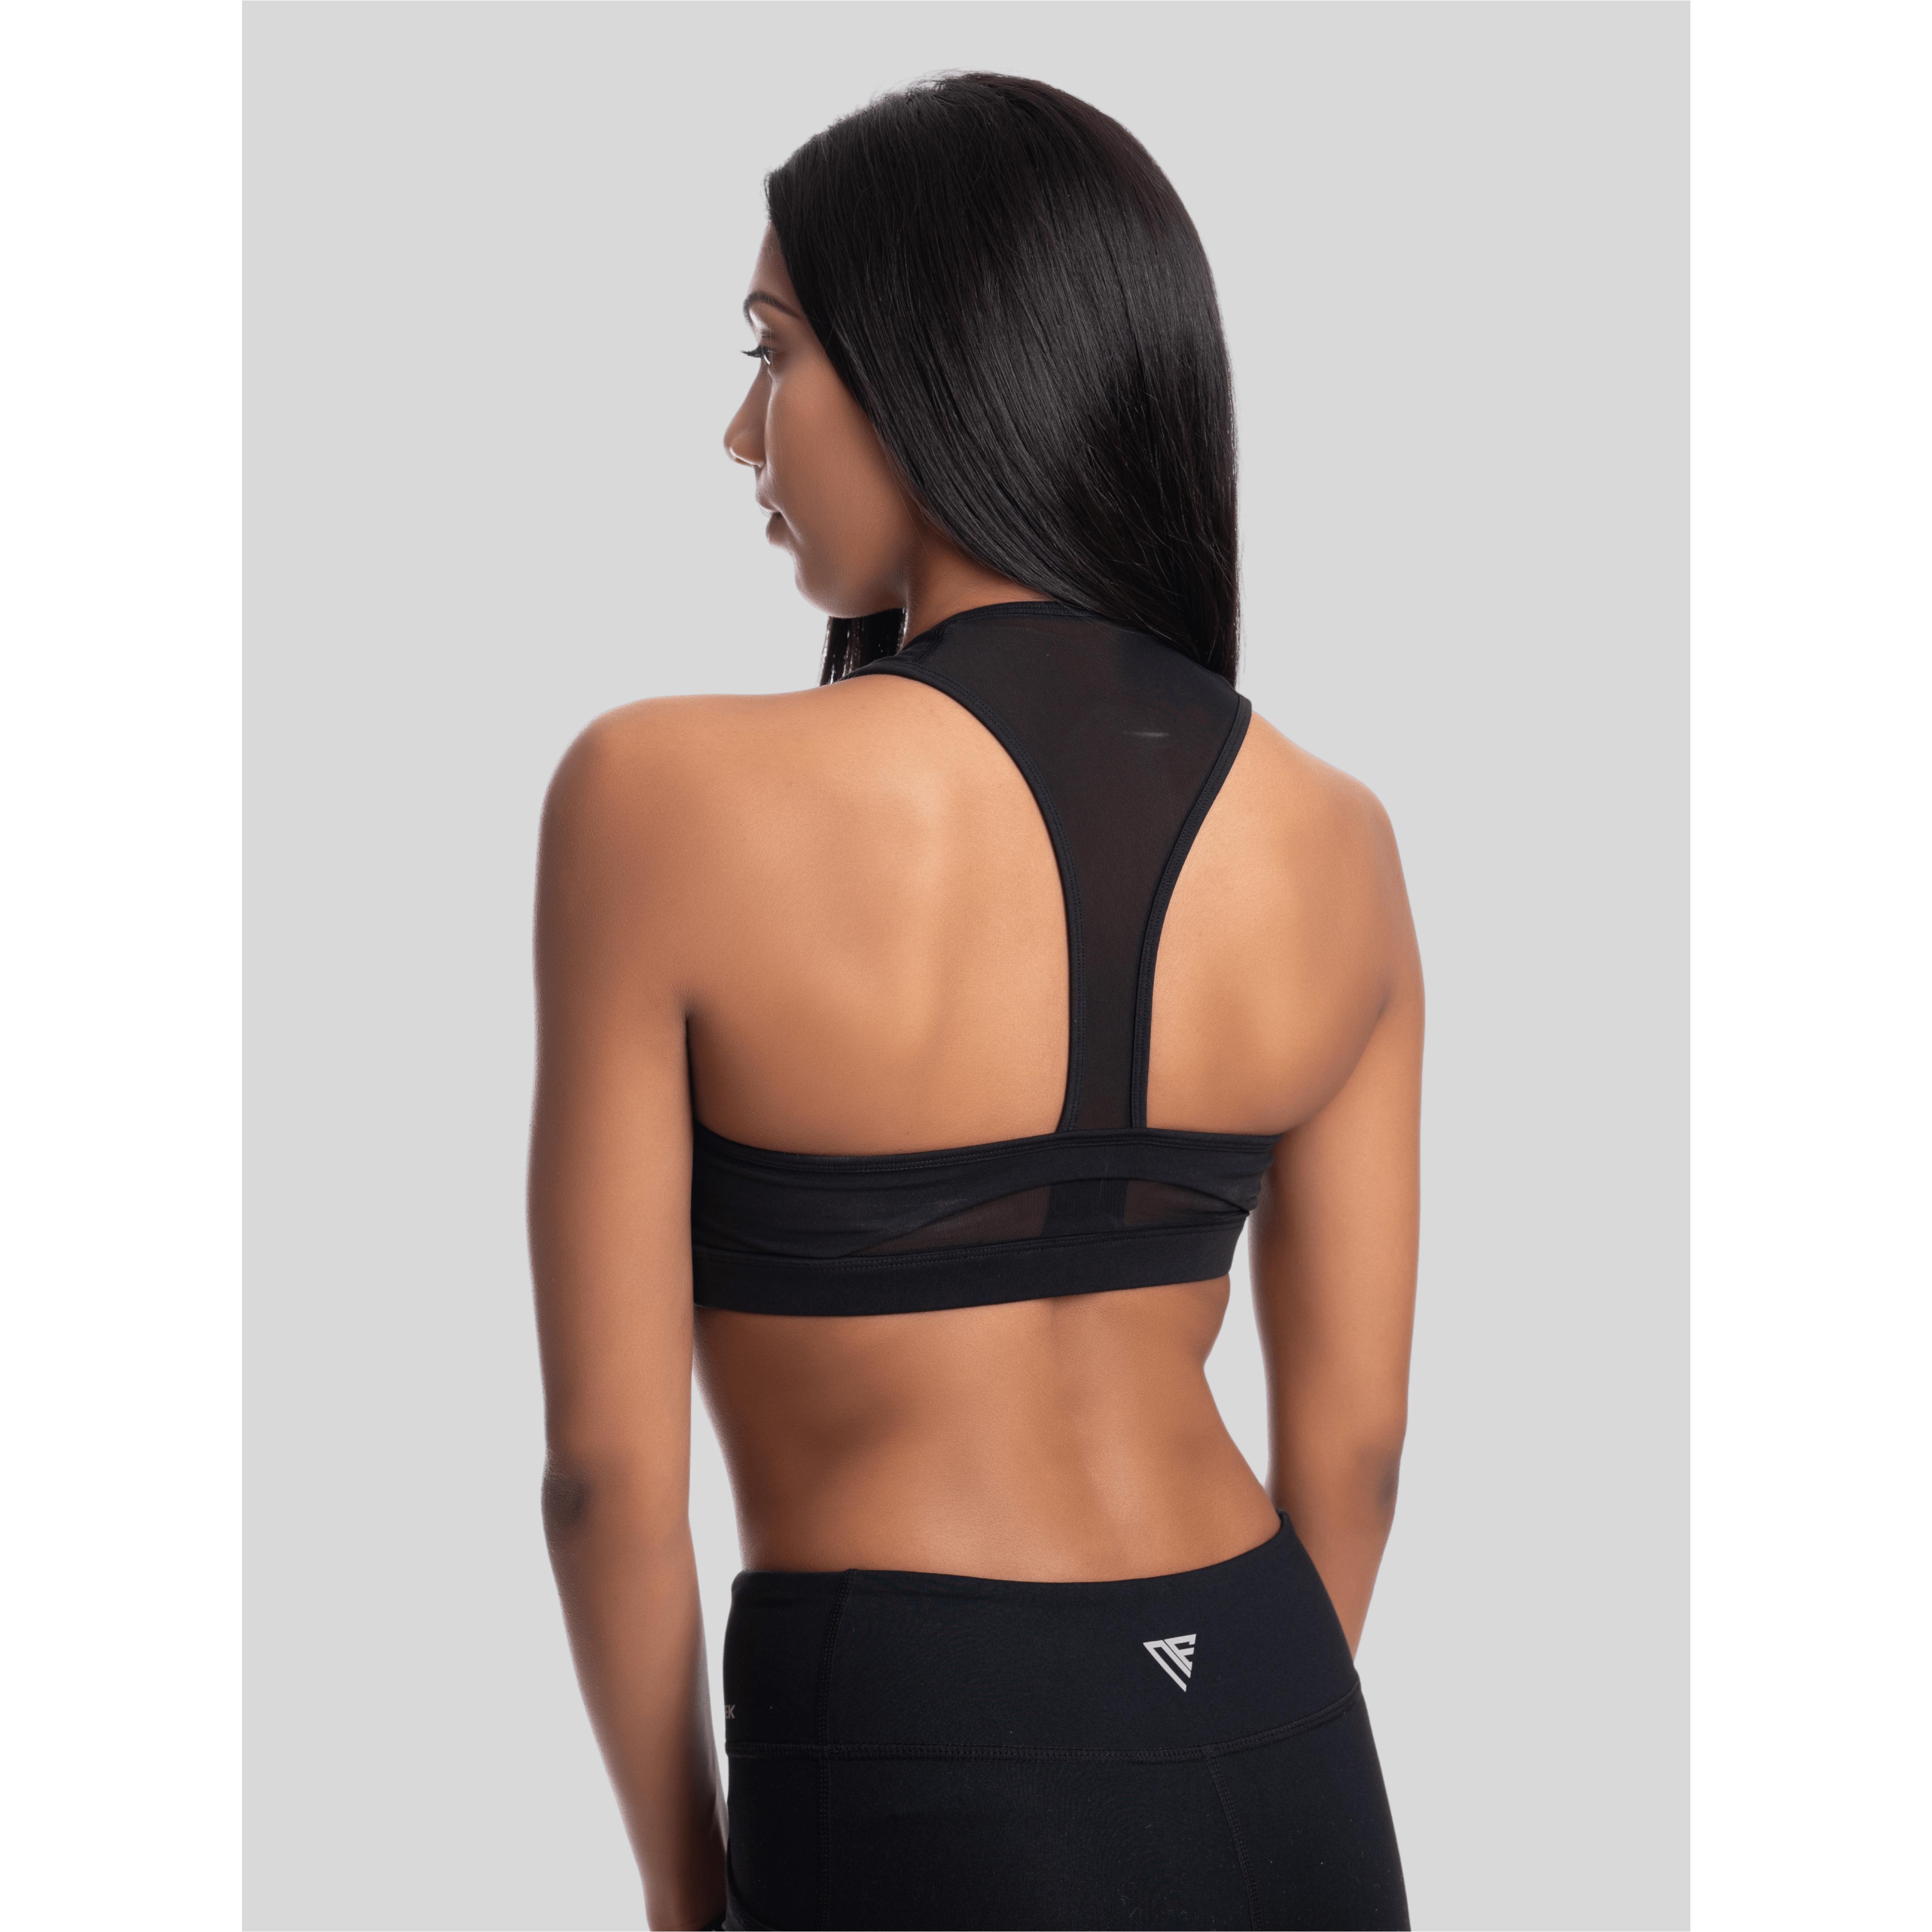 Compression Dance Sports Bra For Women Cross Back Open Halter Design, Ideal  For Running, Yoga, And Gym Workouts From Play_sports, $15.08